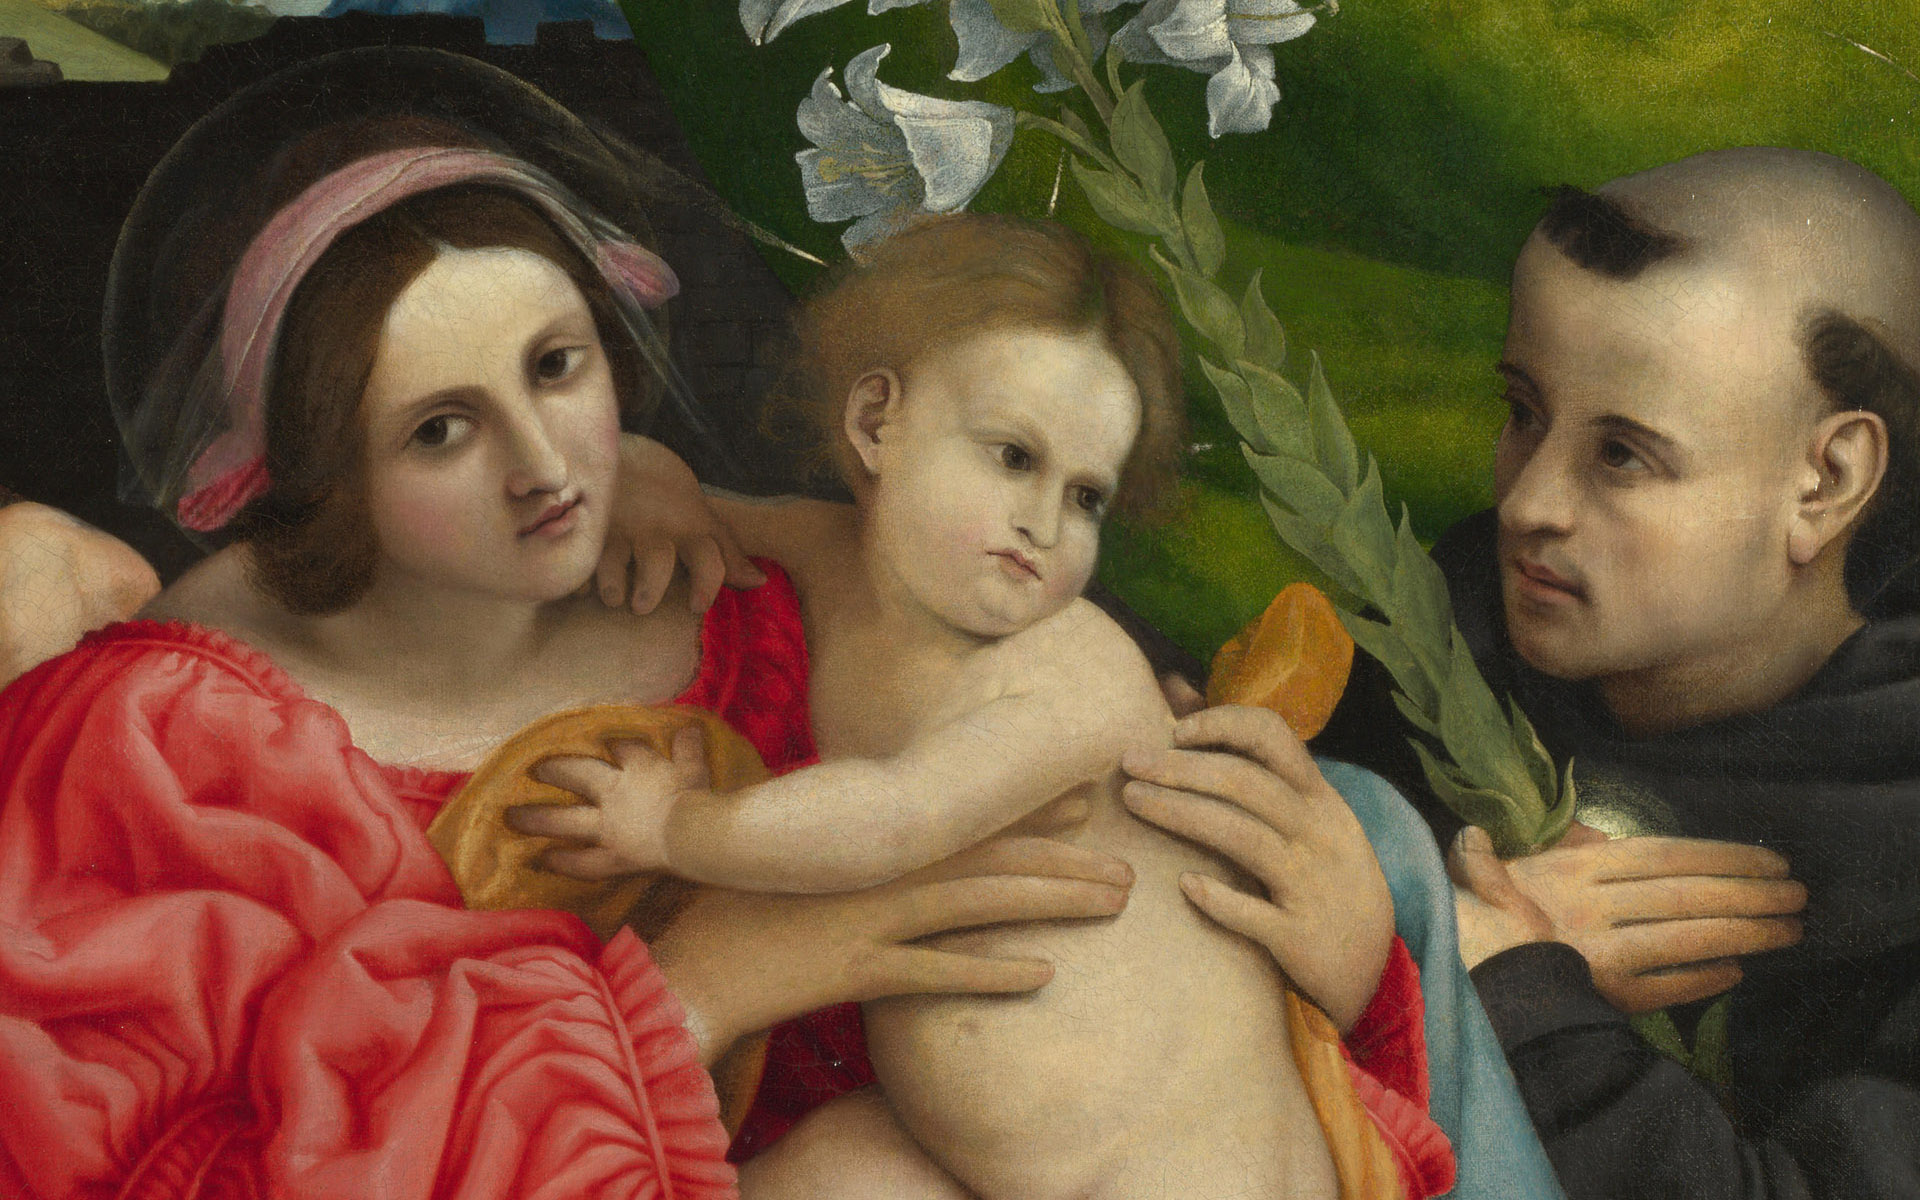 The Virgin and Child with Saints by Lorenzo Lotto